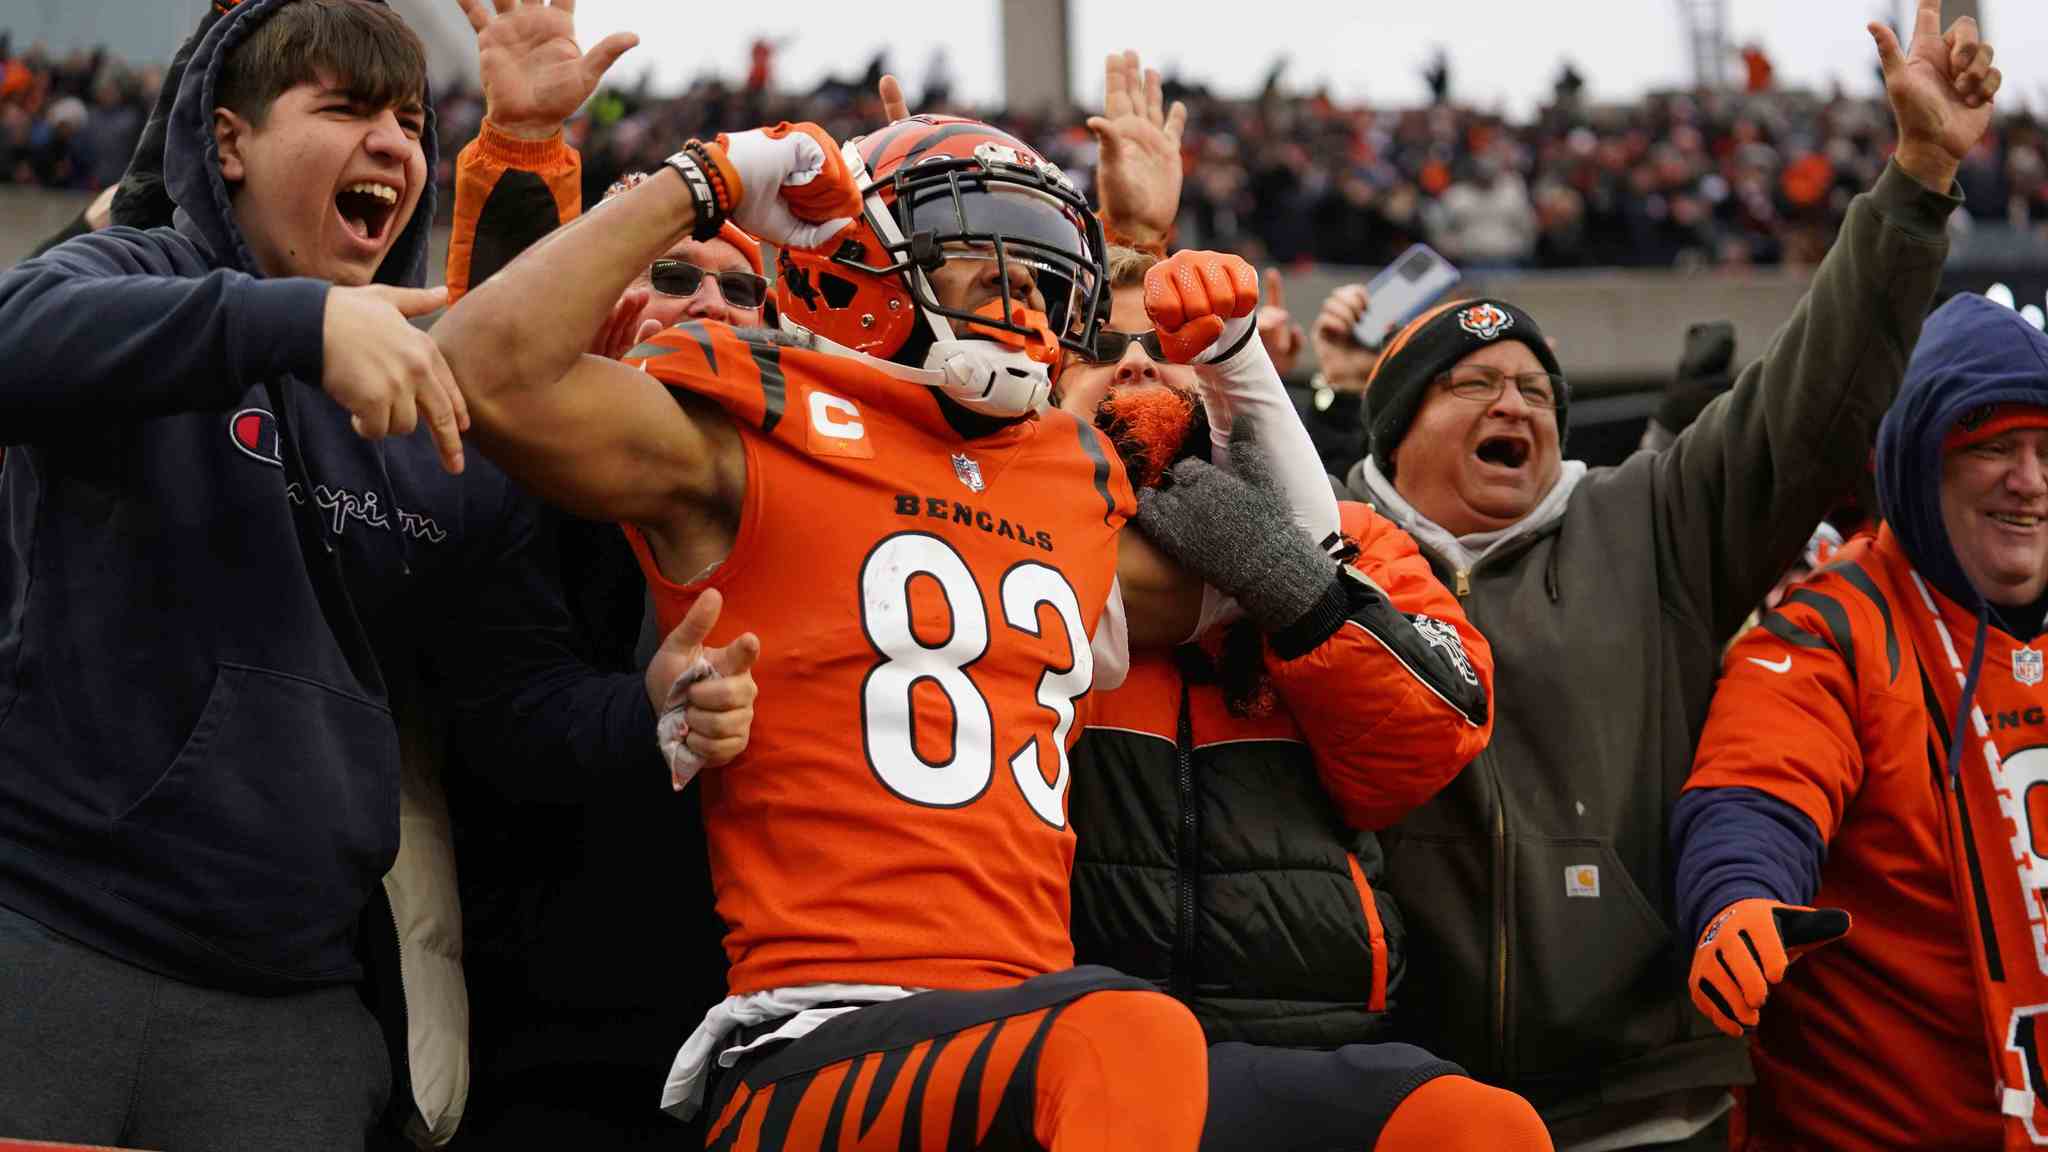 The Bengals are the new AFC North Champions after defeating Kansas City